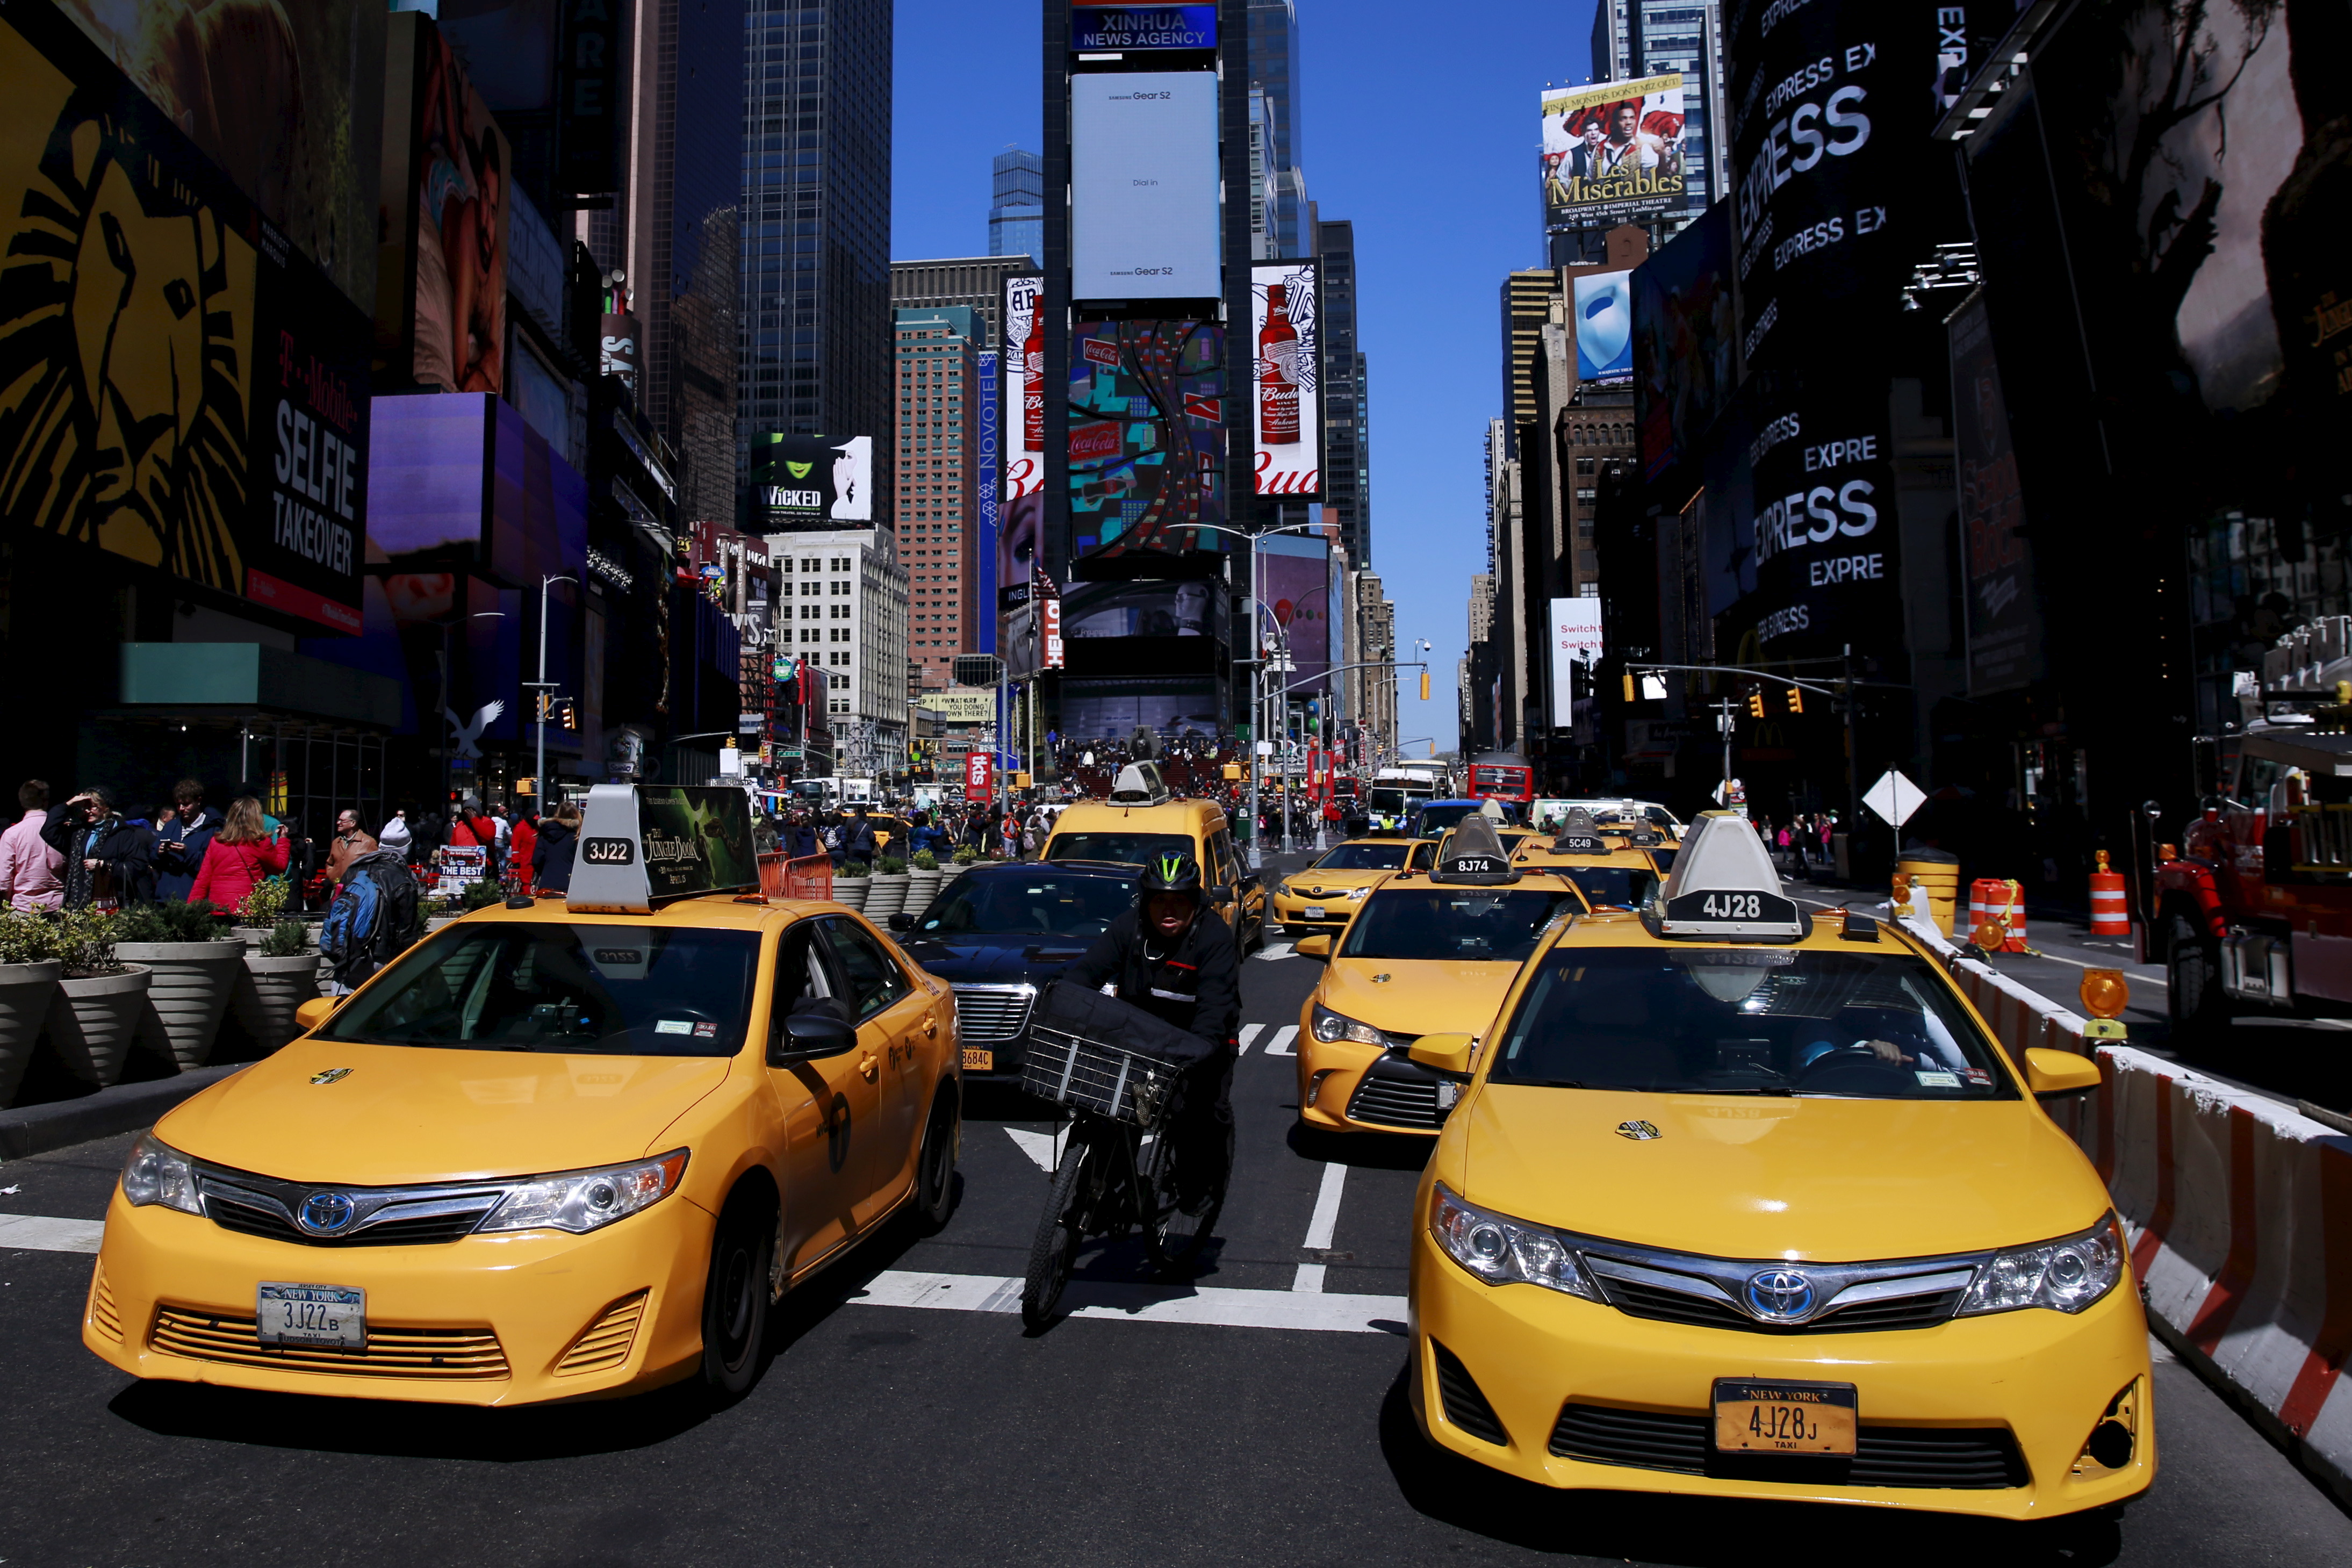 New York City taxi cabs drive through Times Square in New York